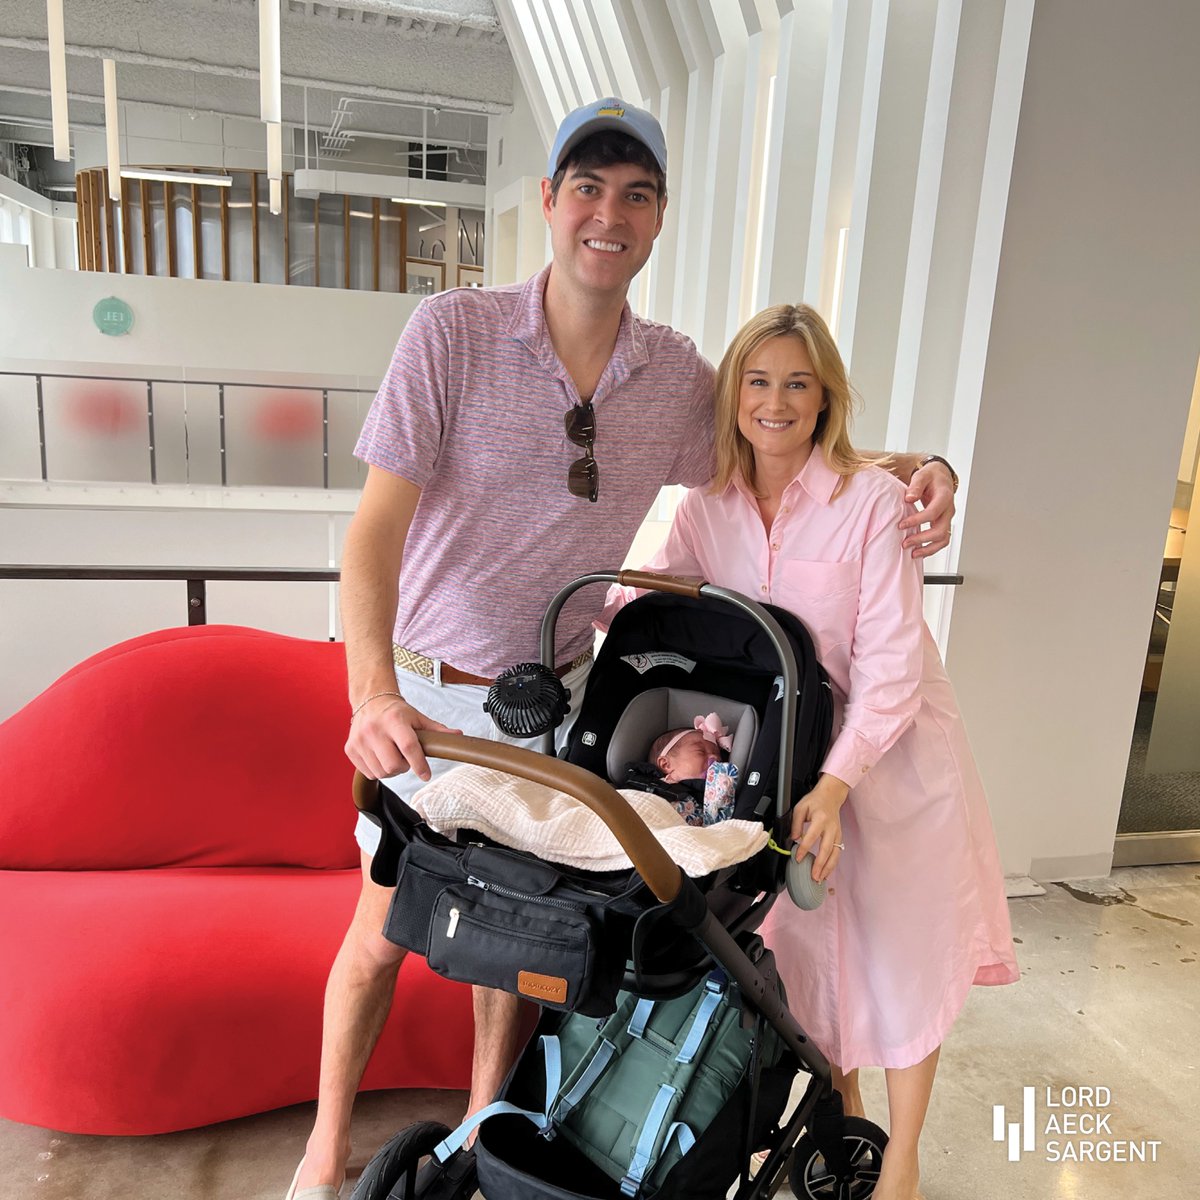 #Congratulations to the Harmons on their newborn baby girl, Junie! We can't wait for her to intern with #LAS in 20 years 😄💚

#NewestLASer #WelcomeToTheTeam #FutureArchitect